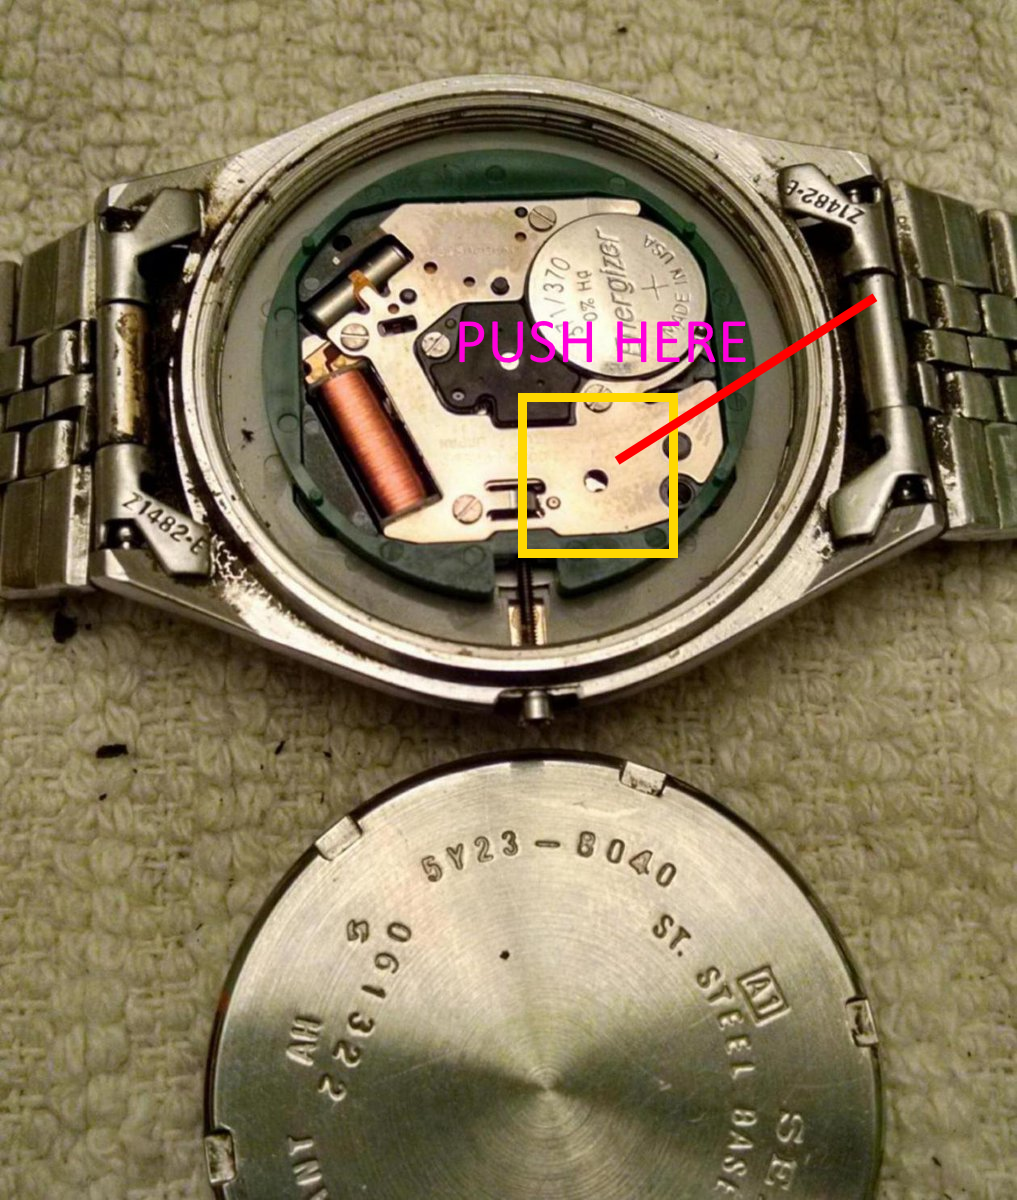 Removing stem on Seiko 5y23-8040 | The Watch Site